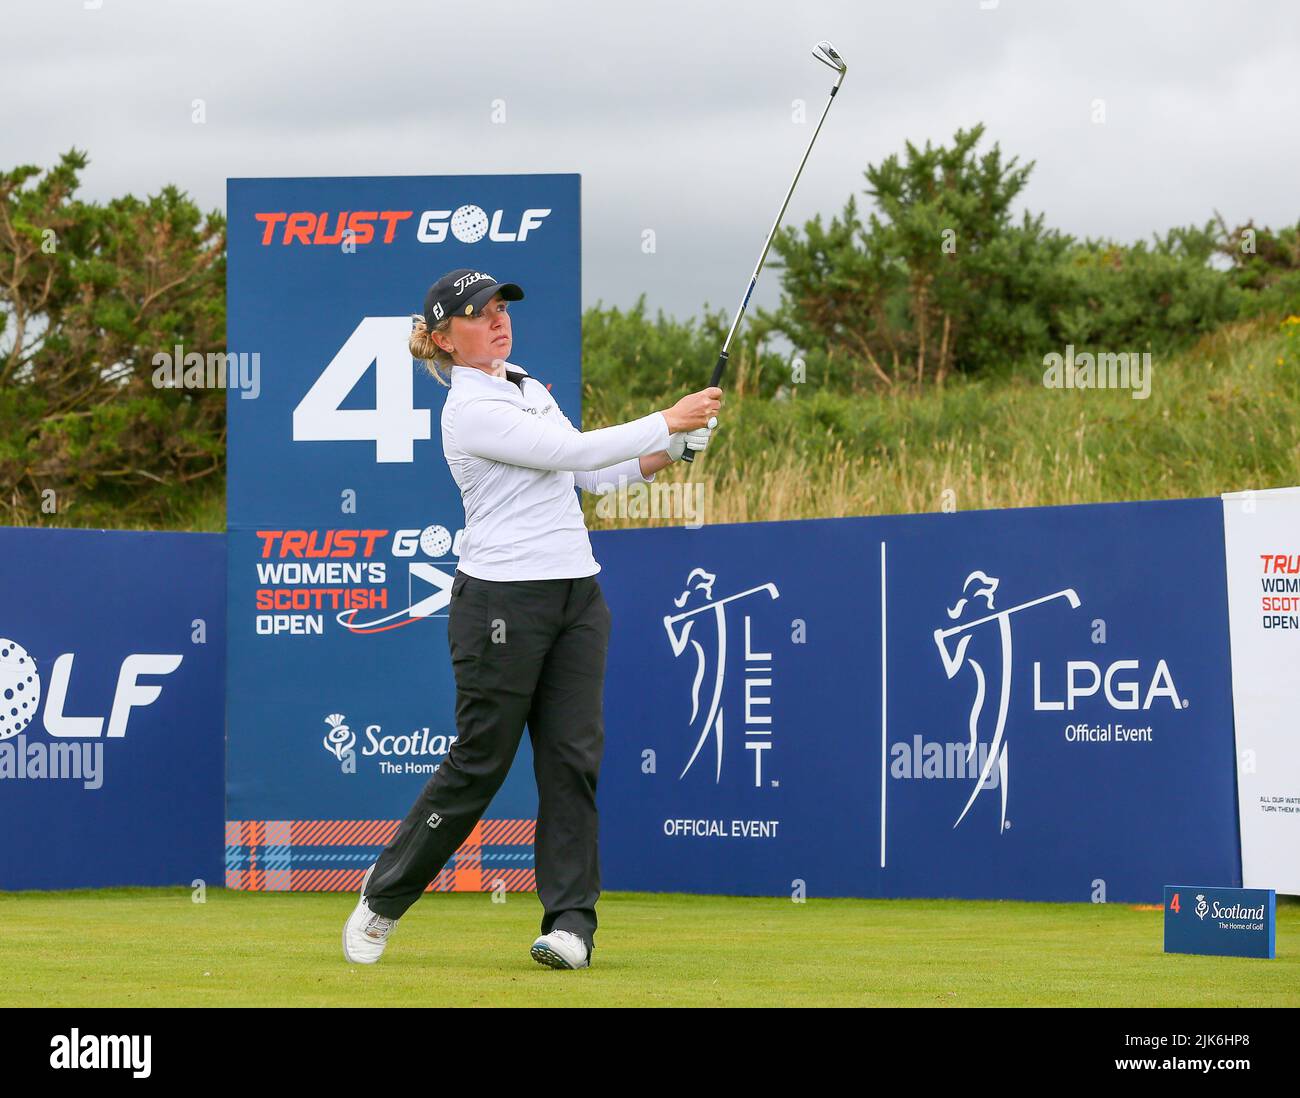 Irvine, UK. 31st July, 2022. On the final day of the Trust Golf Women's Scottish Golf at Dundonald Links Golf Course, Irvine, Ayrshire, UK, the top 12 players are separated by only 4 strokes. The players are playing for a total purse of $2,000,000 and the prestigious trophy. Bronte Law on the 4th tee. Credit: Findlay/Alamy Live News Stock Photo